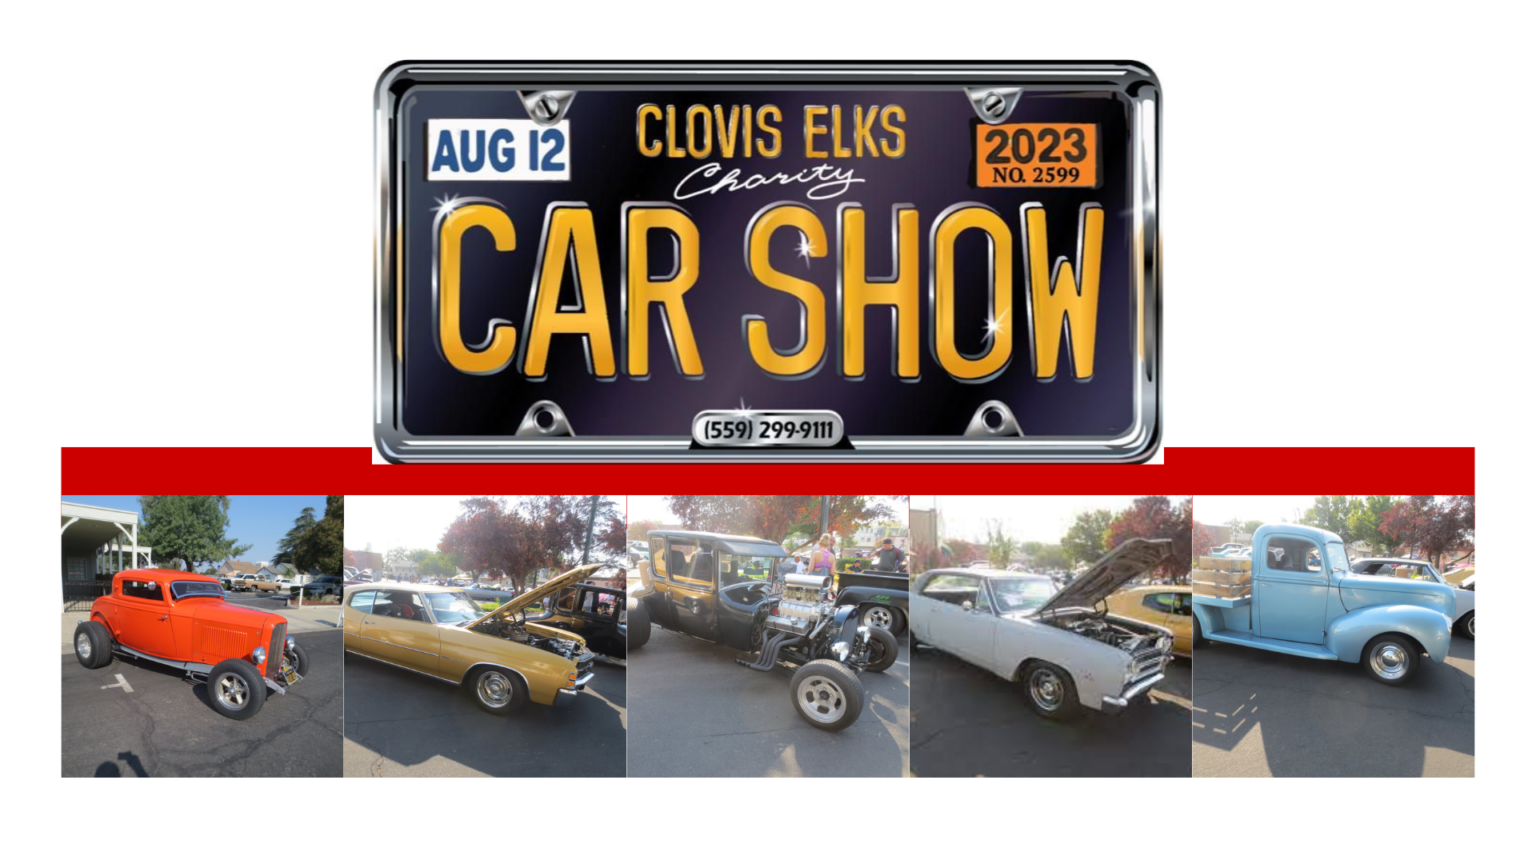 Events from August 26 – October 7 – Visit Clovis